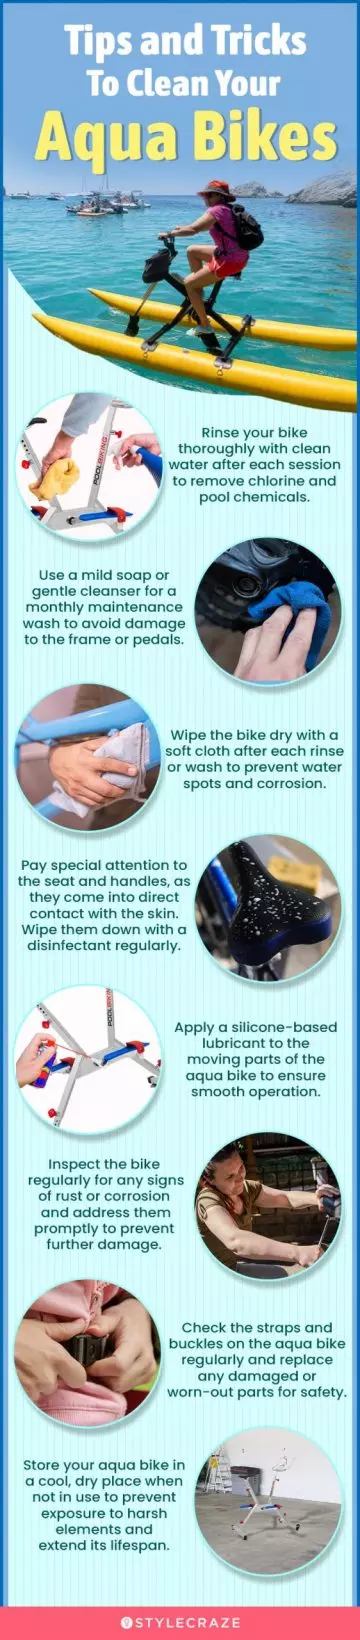 Tips and Tricks To Clean Your Aqua Bikes (infographic)